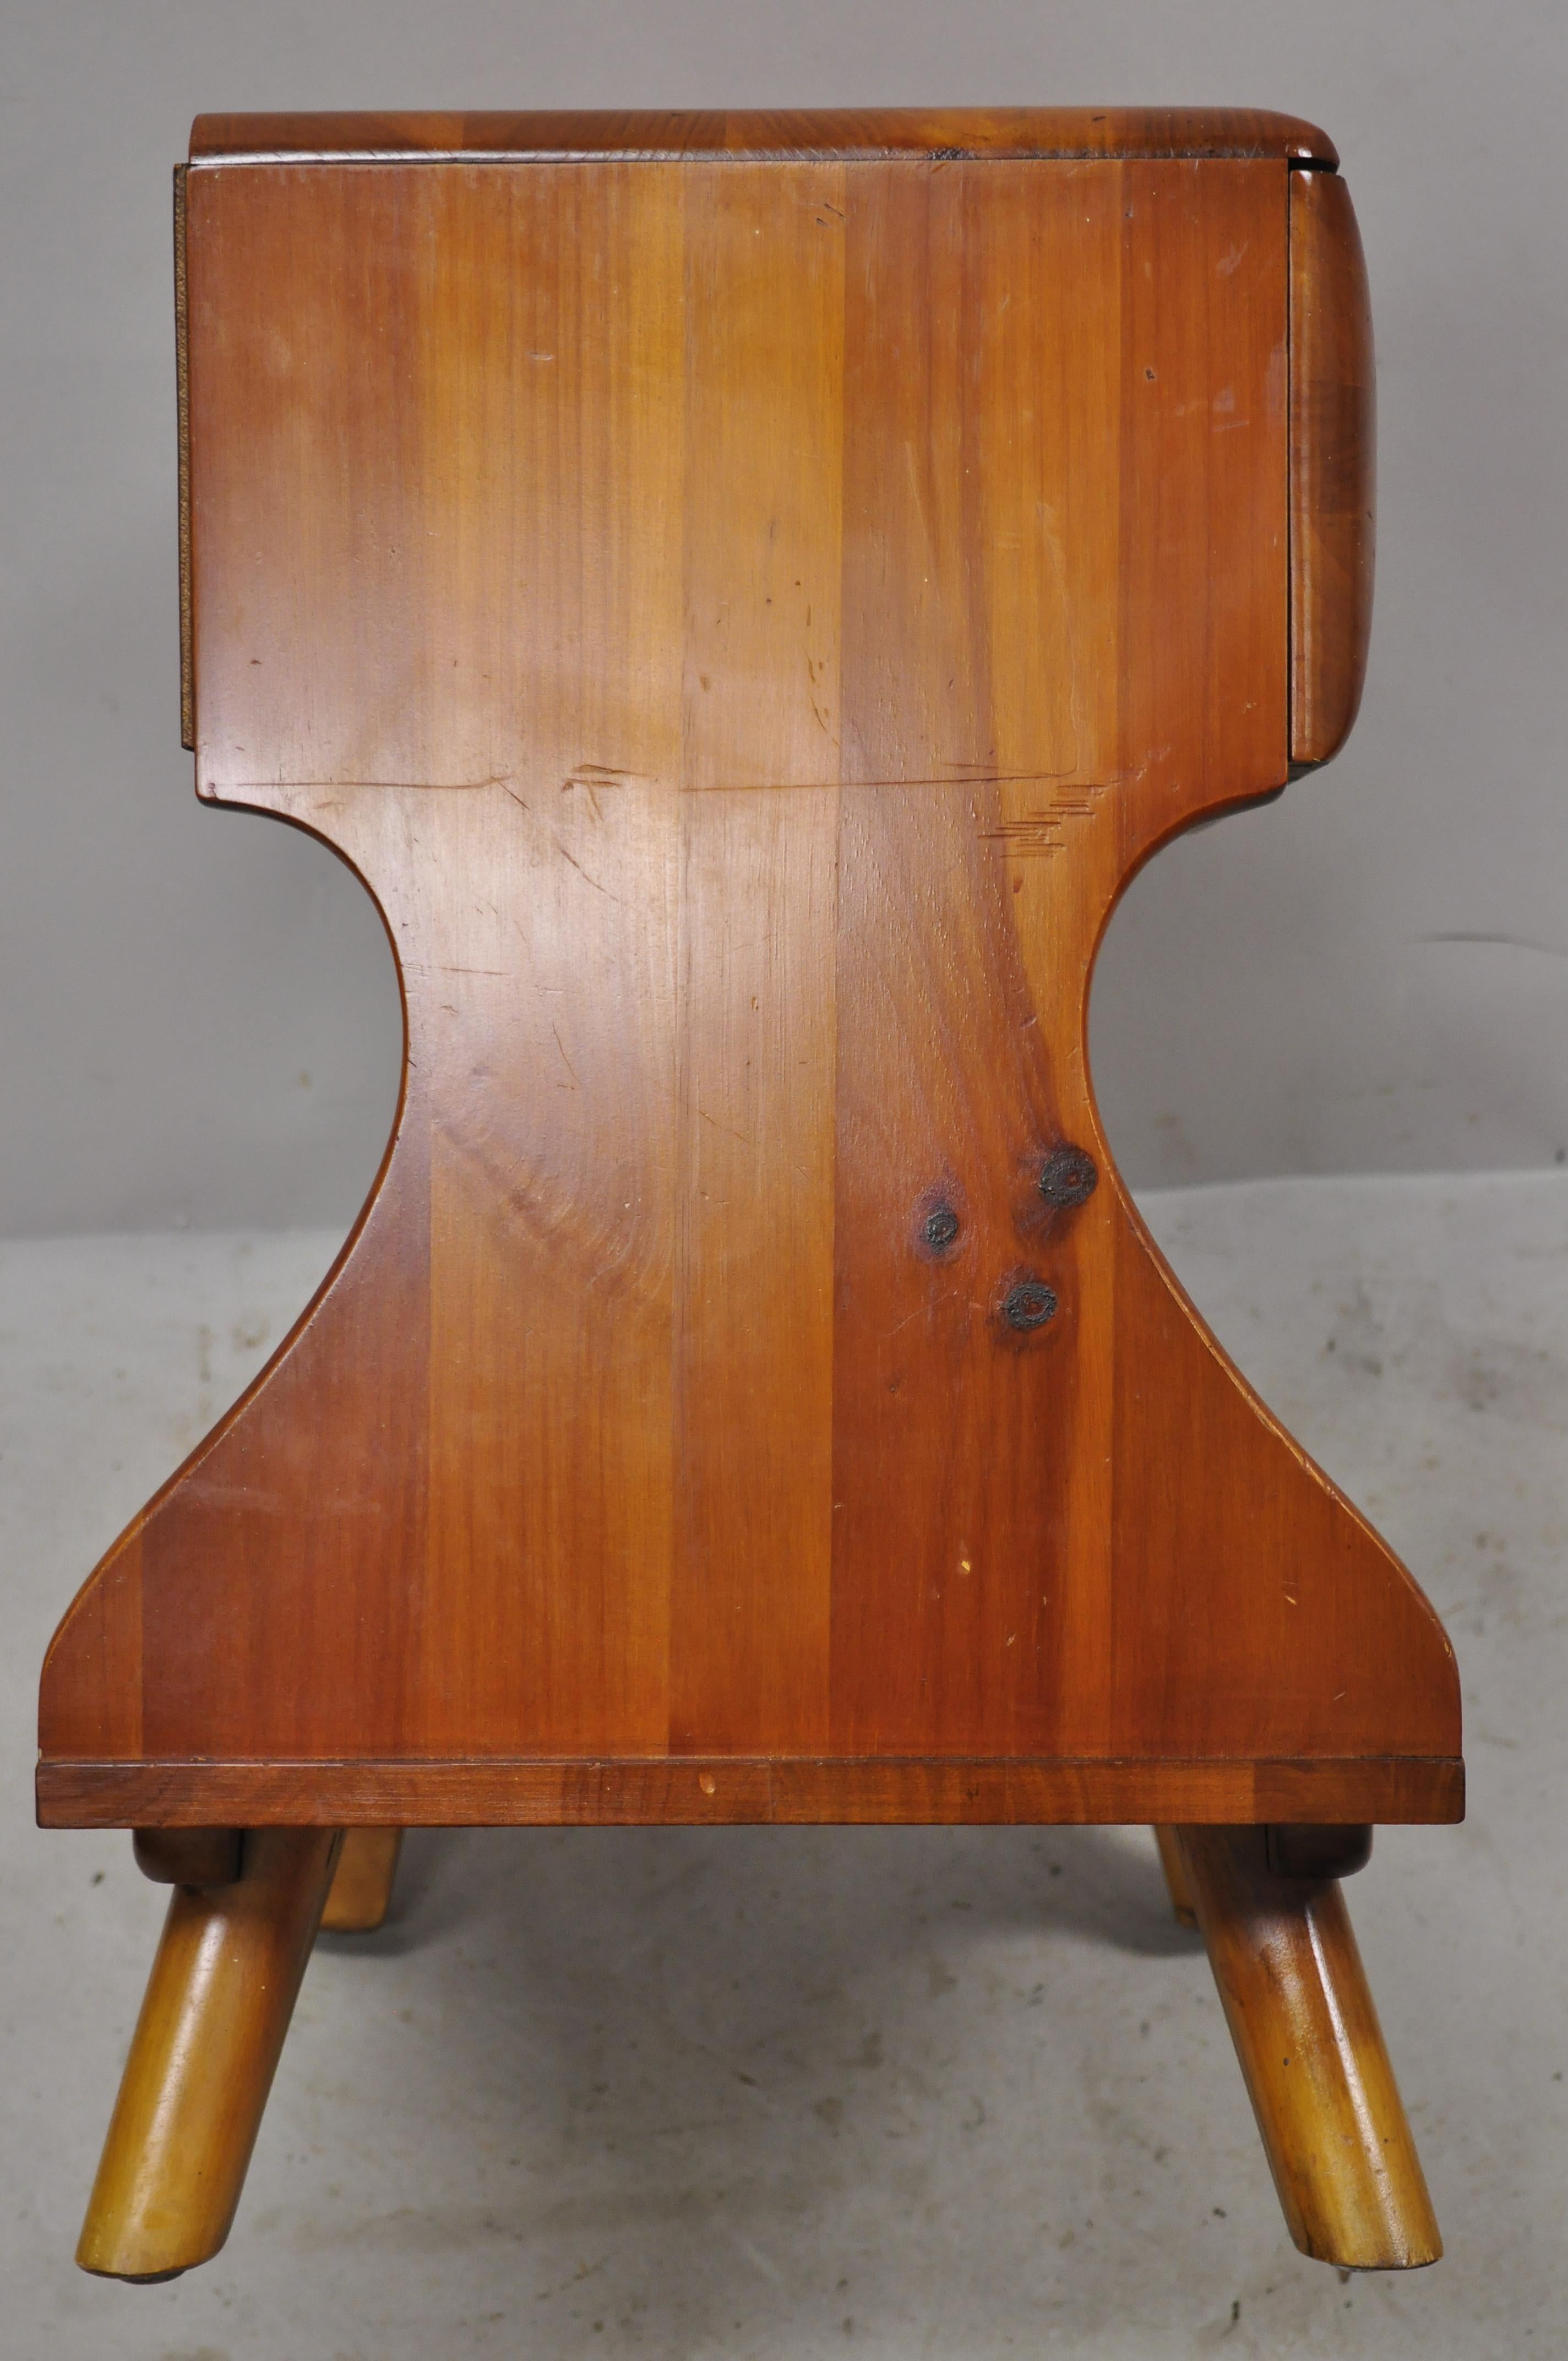 20th Century Midcentury Franklin Shockey Sculptured Pine One-Drawer Nightstand Bedside Table